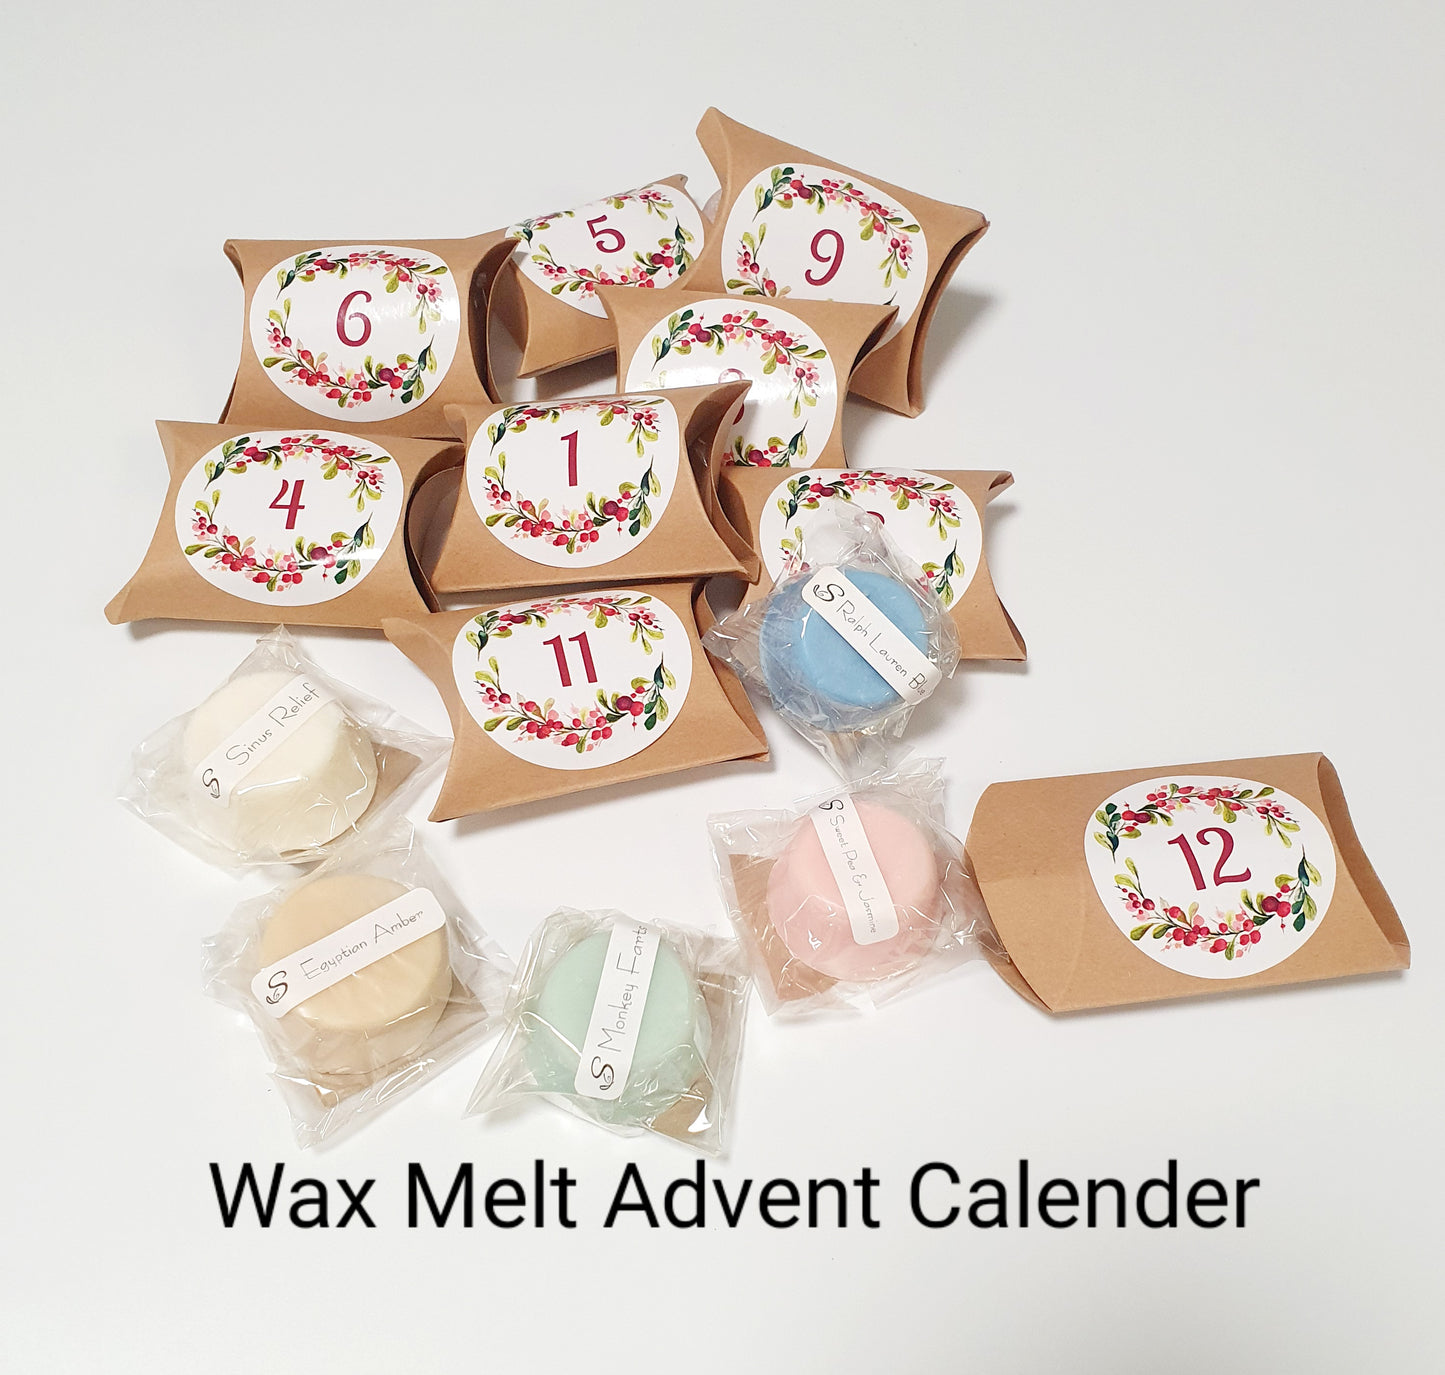 Soy Wax Melt Advent Calender for Adults